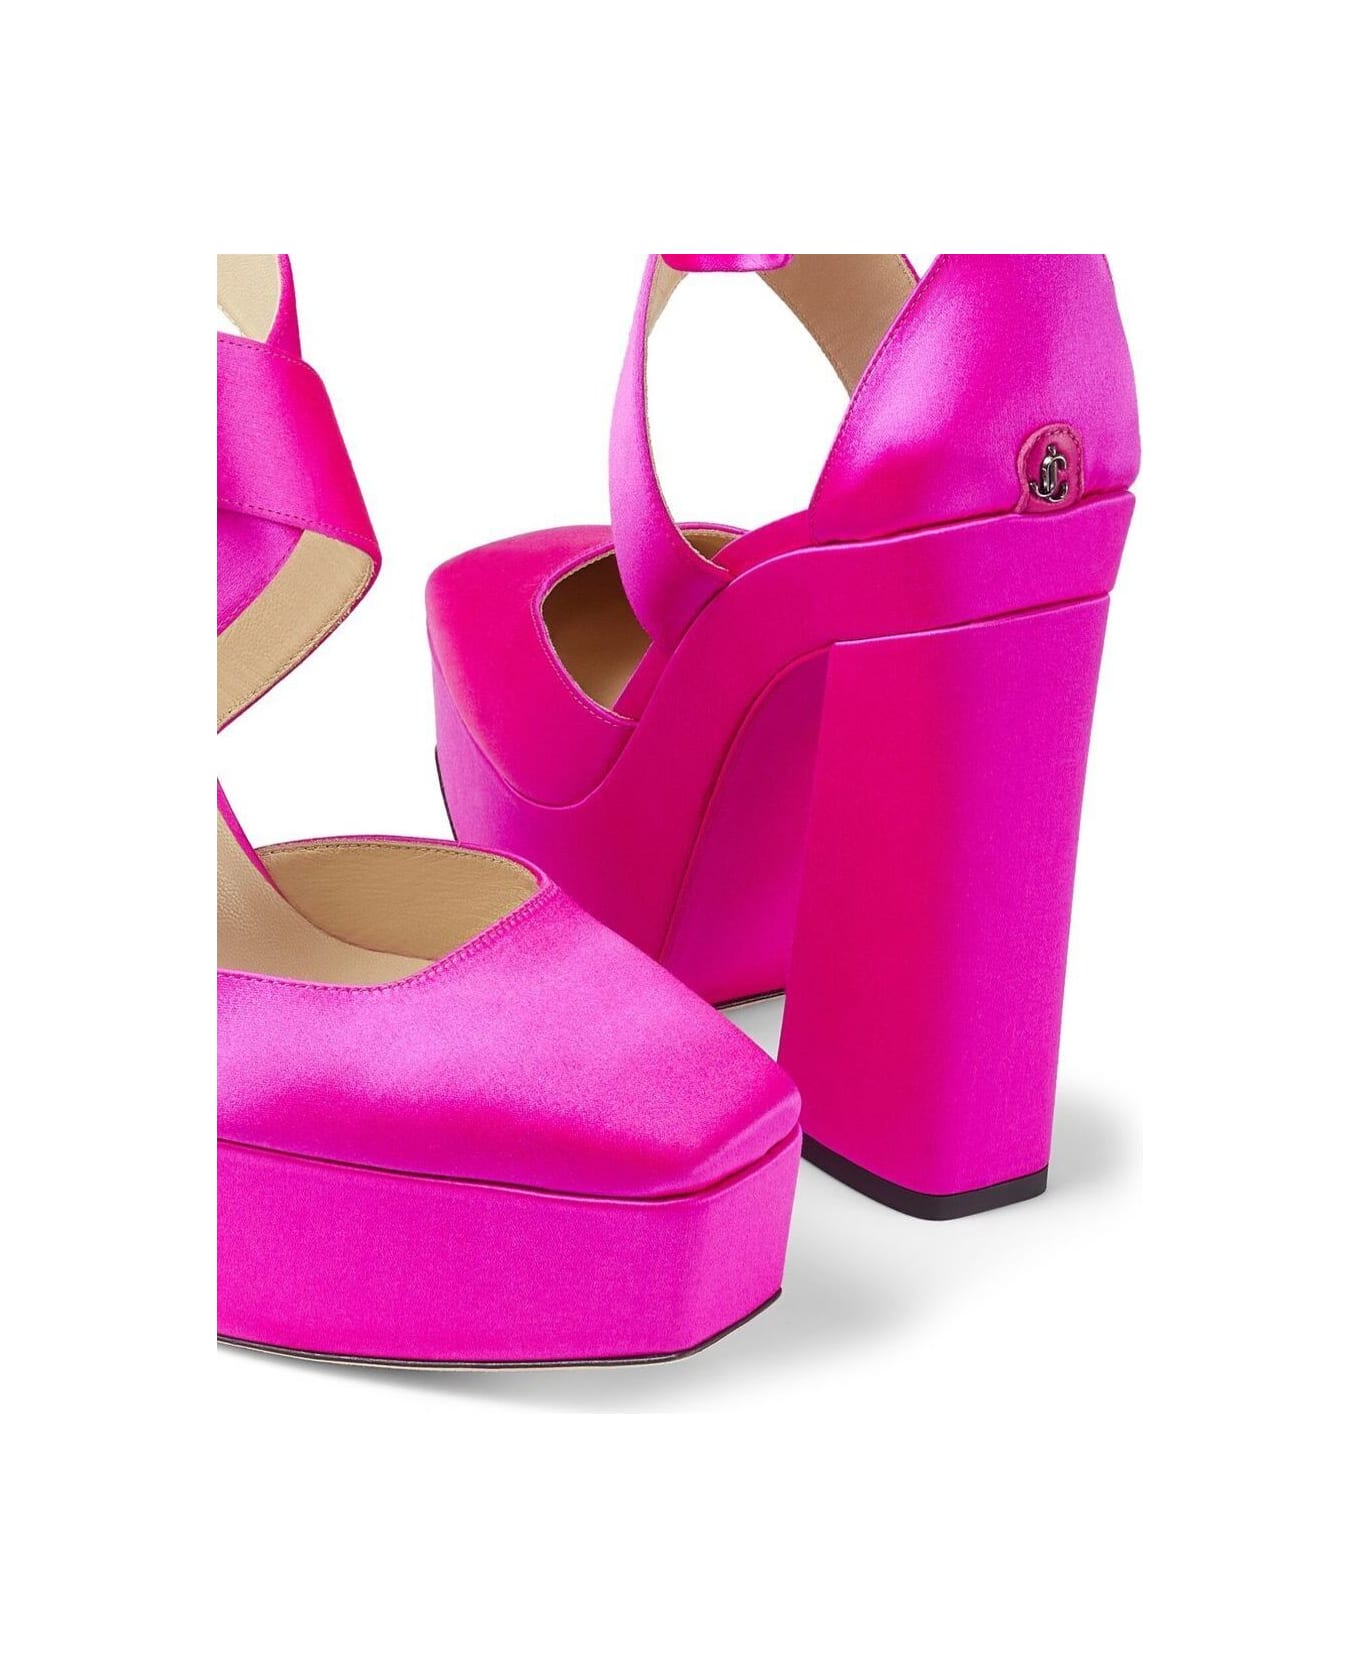 Jimmy Choo Fuchsia Pink Gian Platform Pumps In Satin And Leather Woman - Fuxia ハイヒール